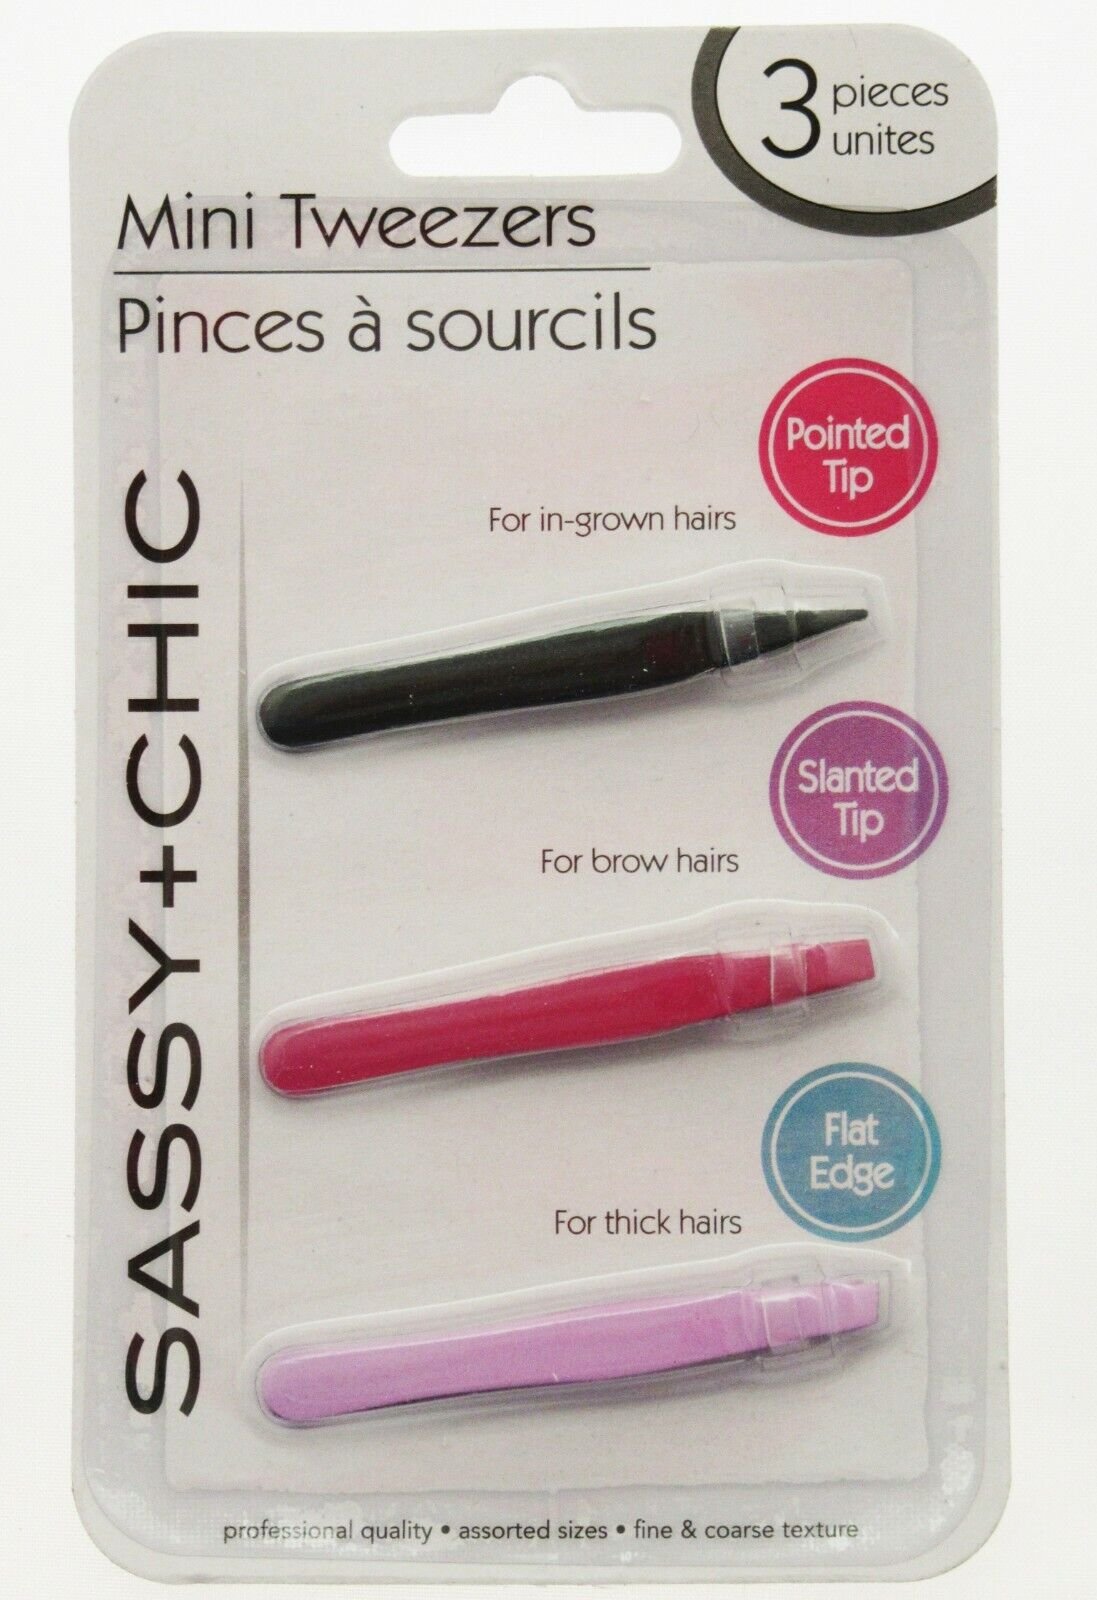 Mini tweezers ~ Sassy & Chic ~ 3pc set For In-Grown Brow & Thick Hairs Hair